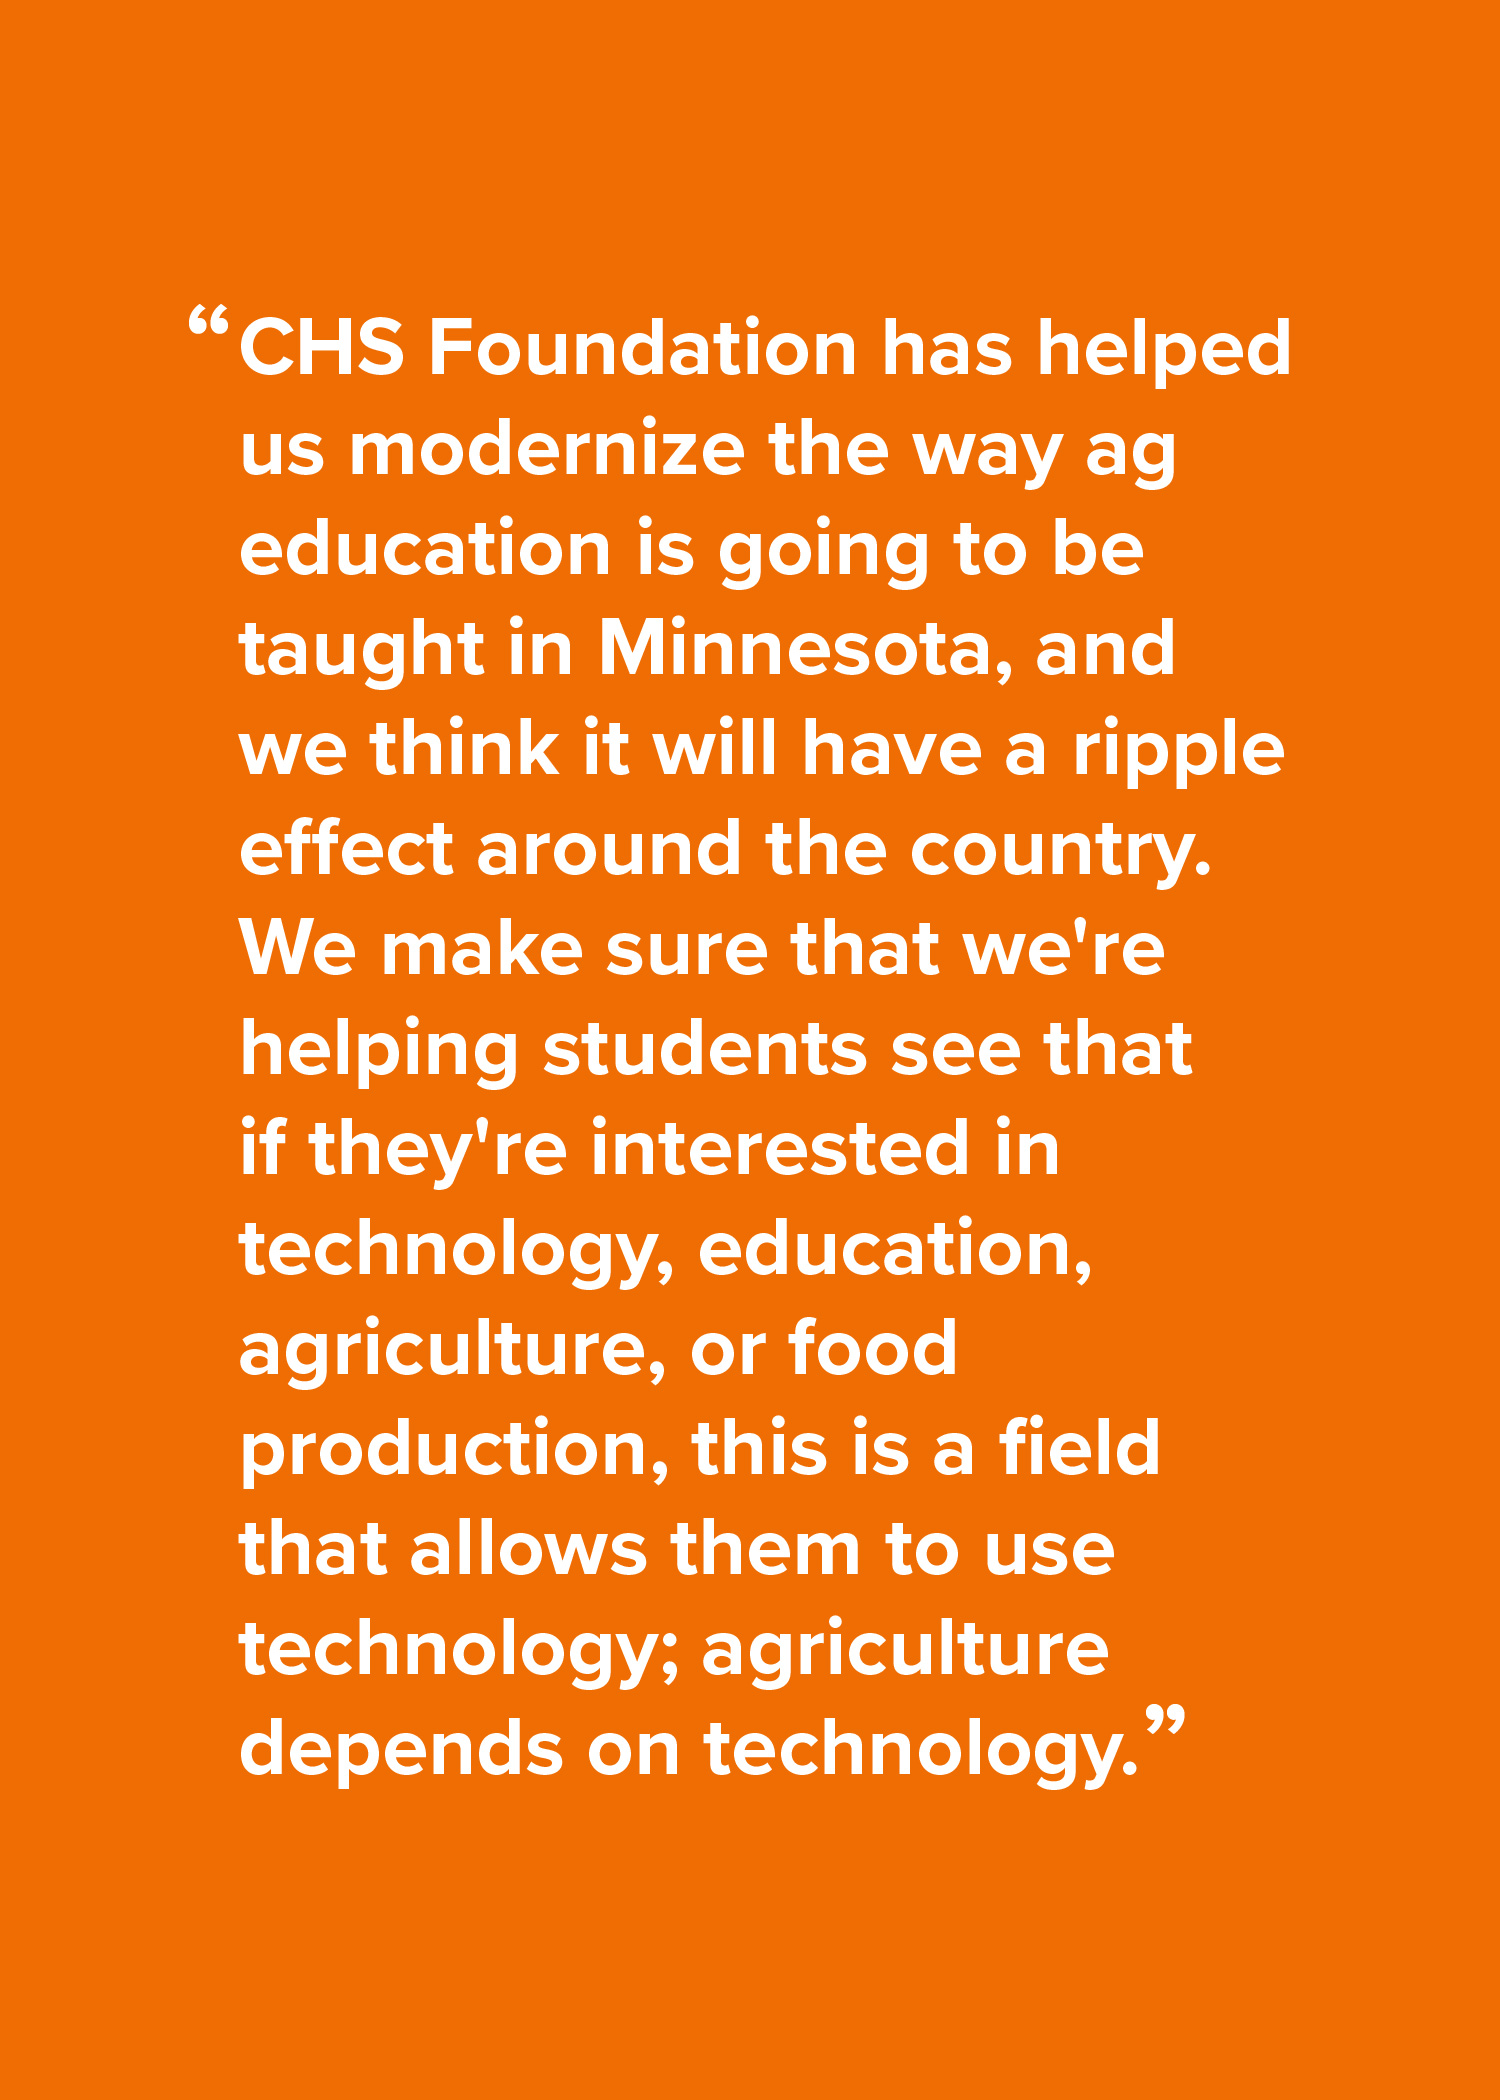 CHS Foundation has helped us modernize the way ag education is going to be taught in Minnesota, and we think it will have a ripple effect around the country. We make sure that we're helping students see that if they're interested in technology, education, agriculture, or food production, this is a field that allows them to use technology; agriculture depends on technology.